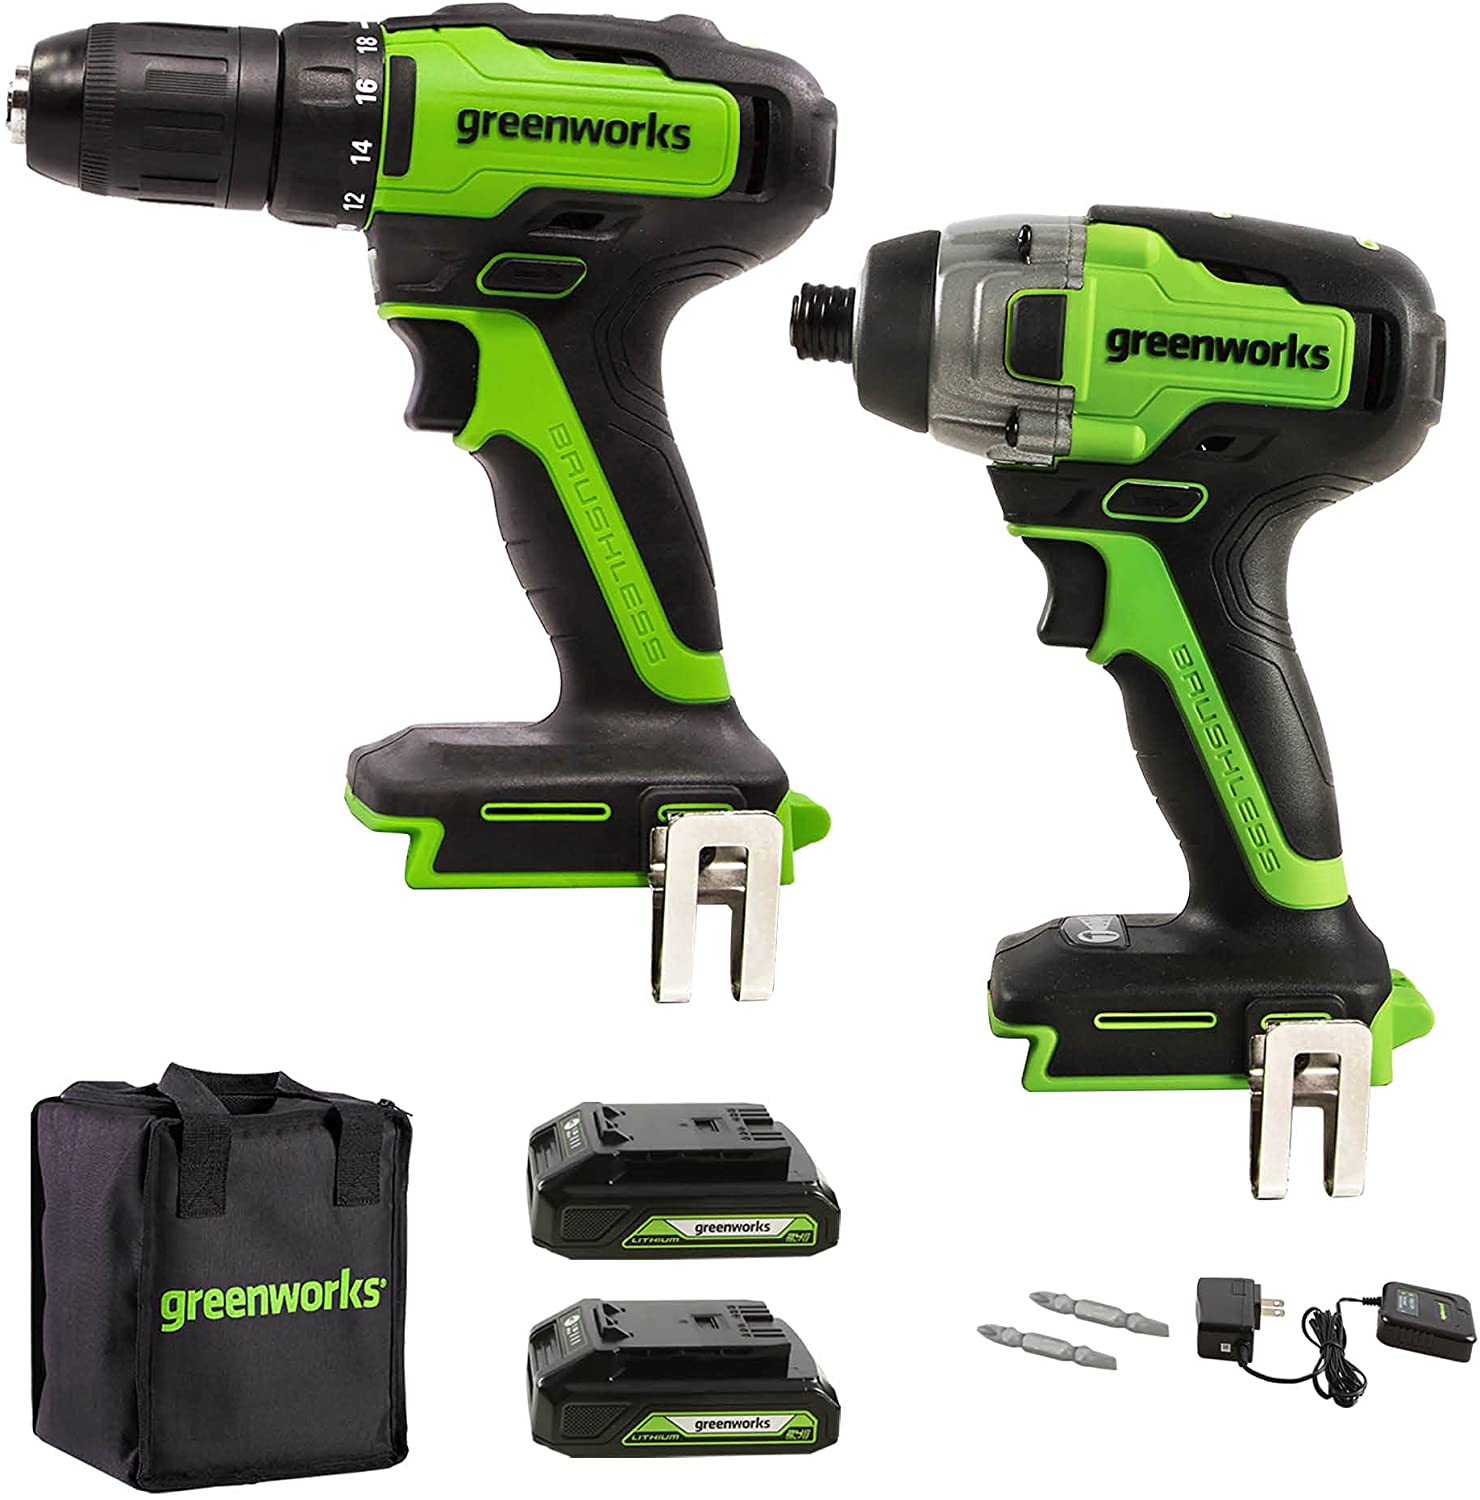 Greenworks 24V Brushless 310 in./lbs Drill / Driver + 1900 in./lbs Impact Driver with a 1.5Ah battery each $99.99